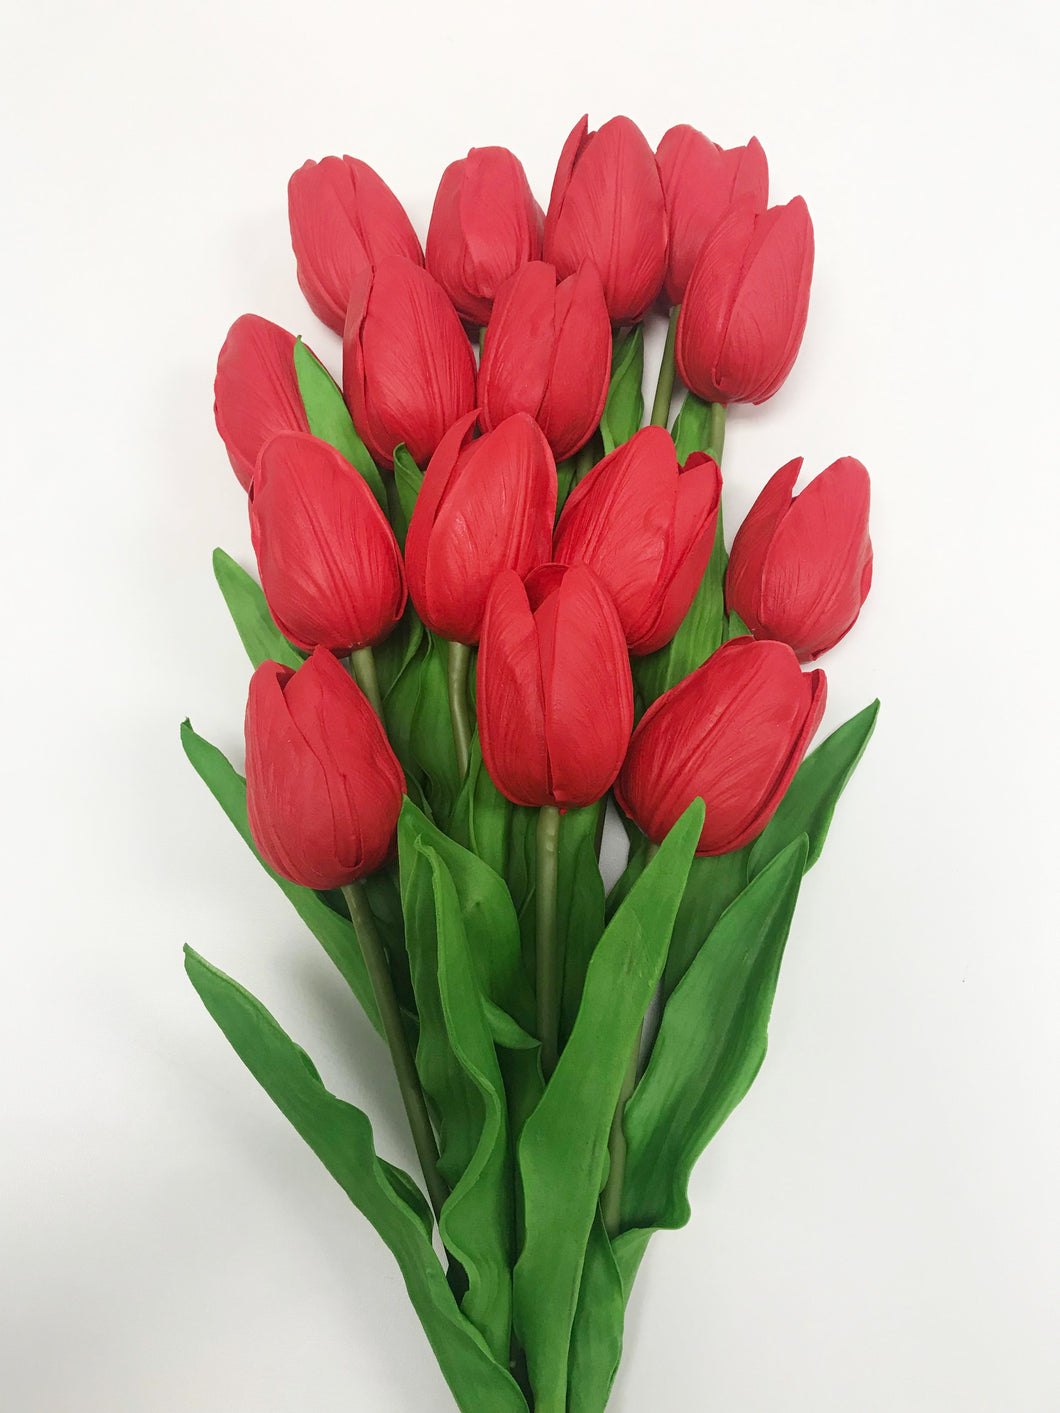 Tulip Flower Artificial Real Touch With Stem Made From Premium PU Leather in Red Color